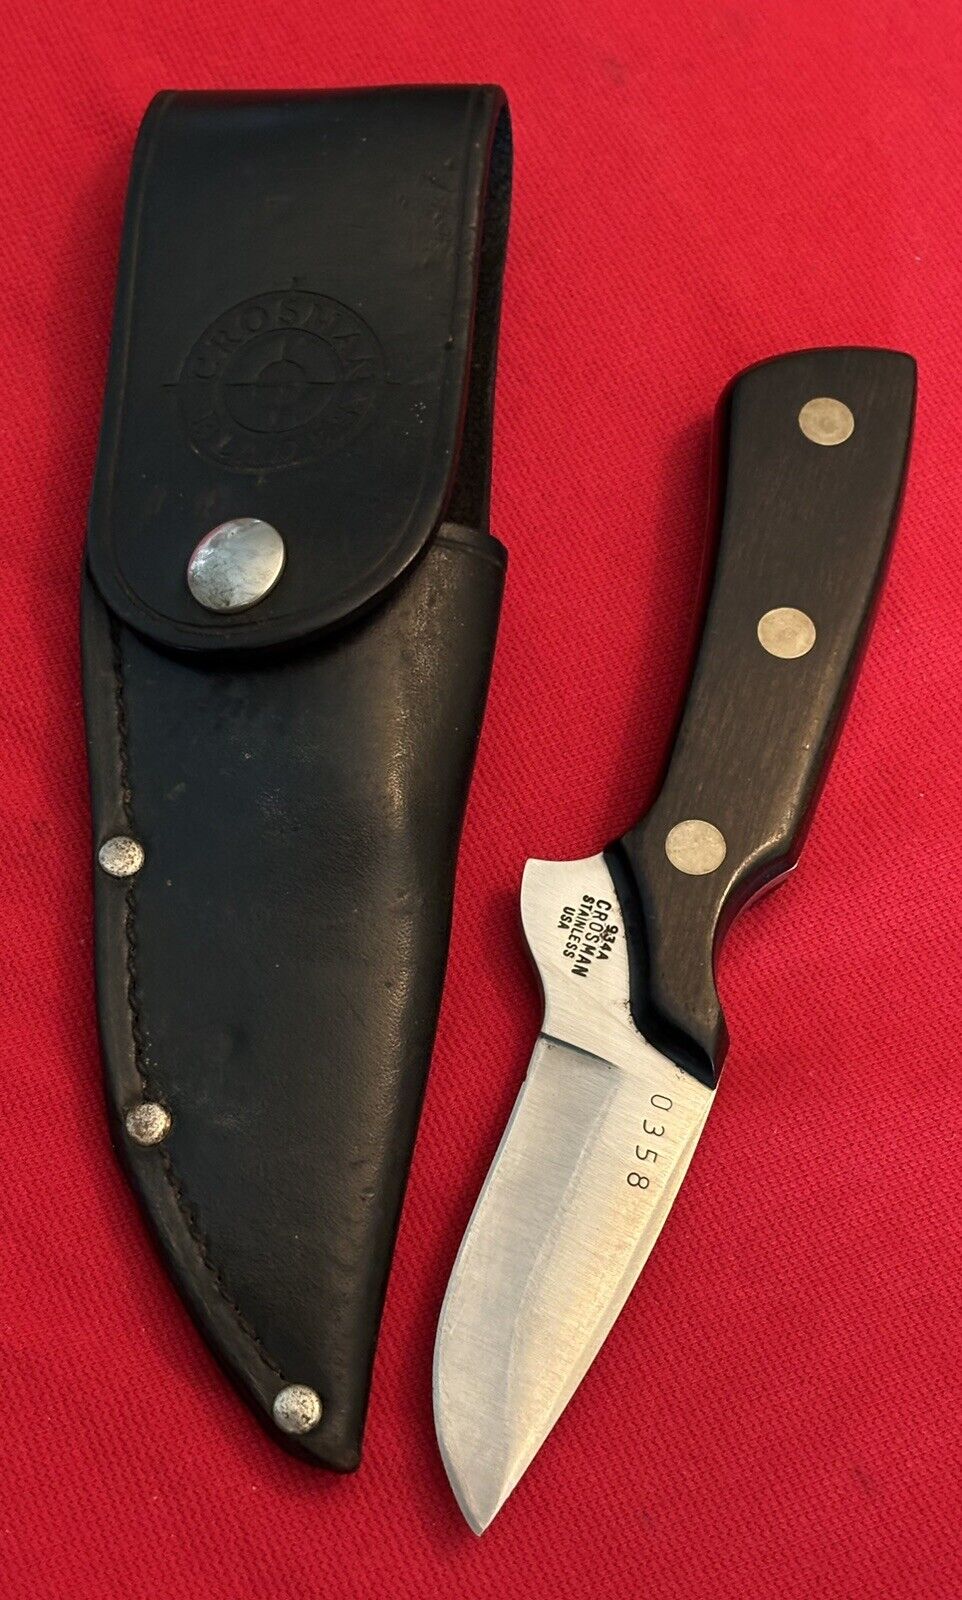 CROSMAN - RARE FIXED BLADE SERIAL #0358 - MADE IN 1982 EXCELLENT VINTAGE 